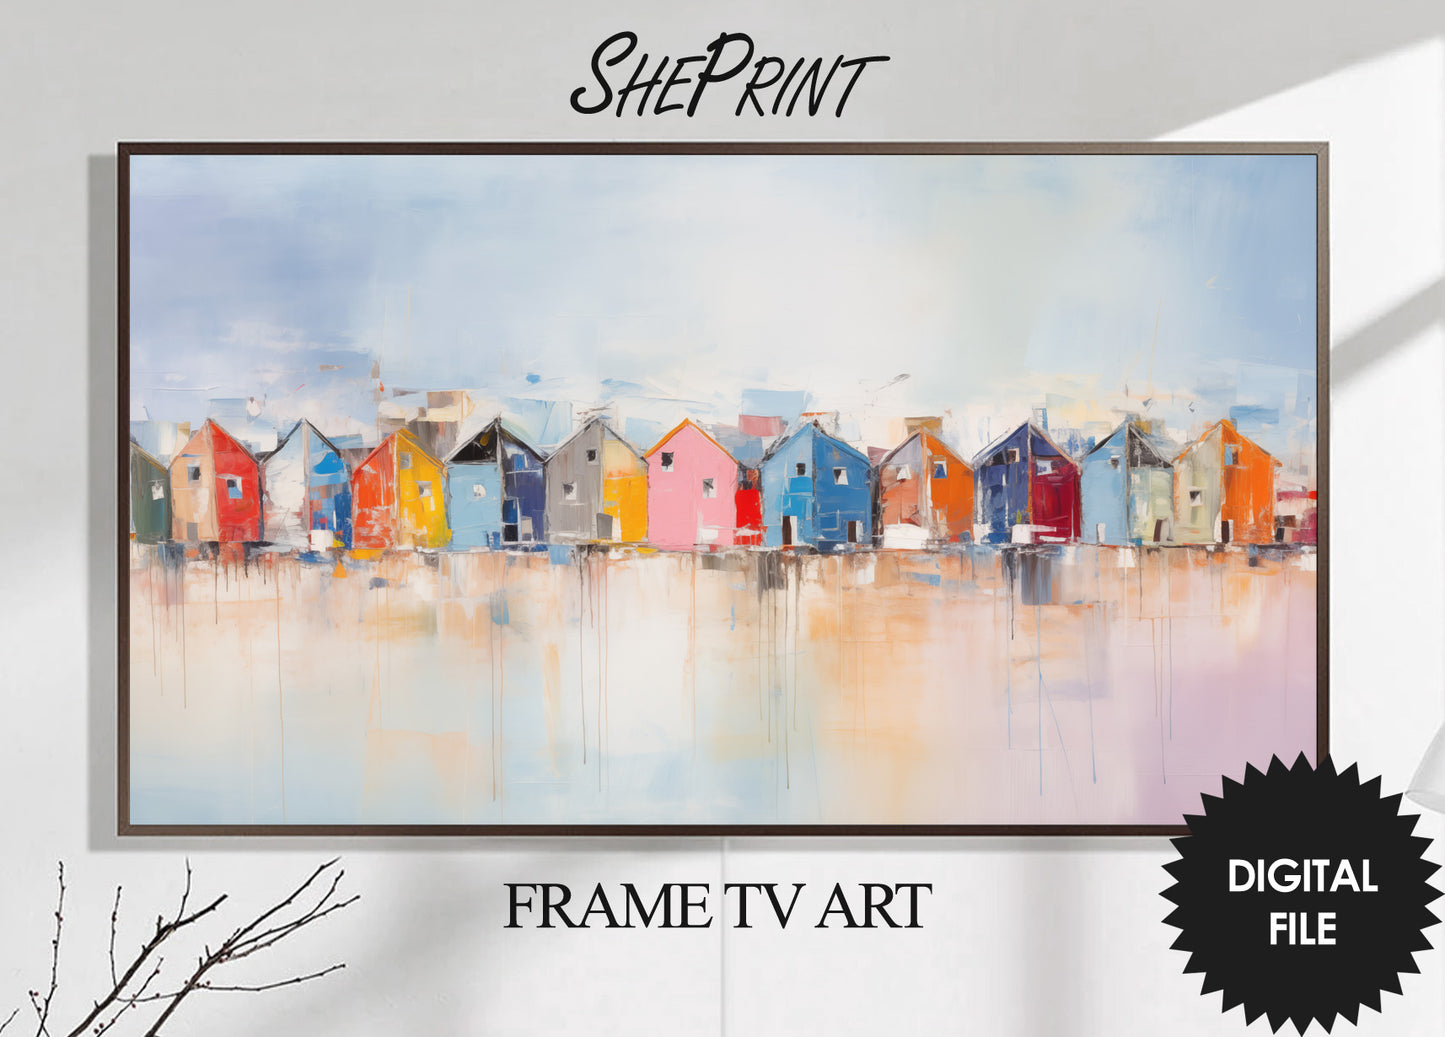 Frame TV Art | Colorful Beach Huts Painting | Summer TV Art preview on Samsung Frame TV